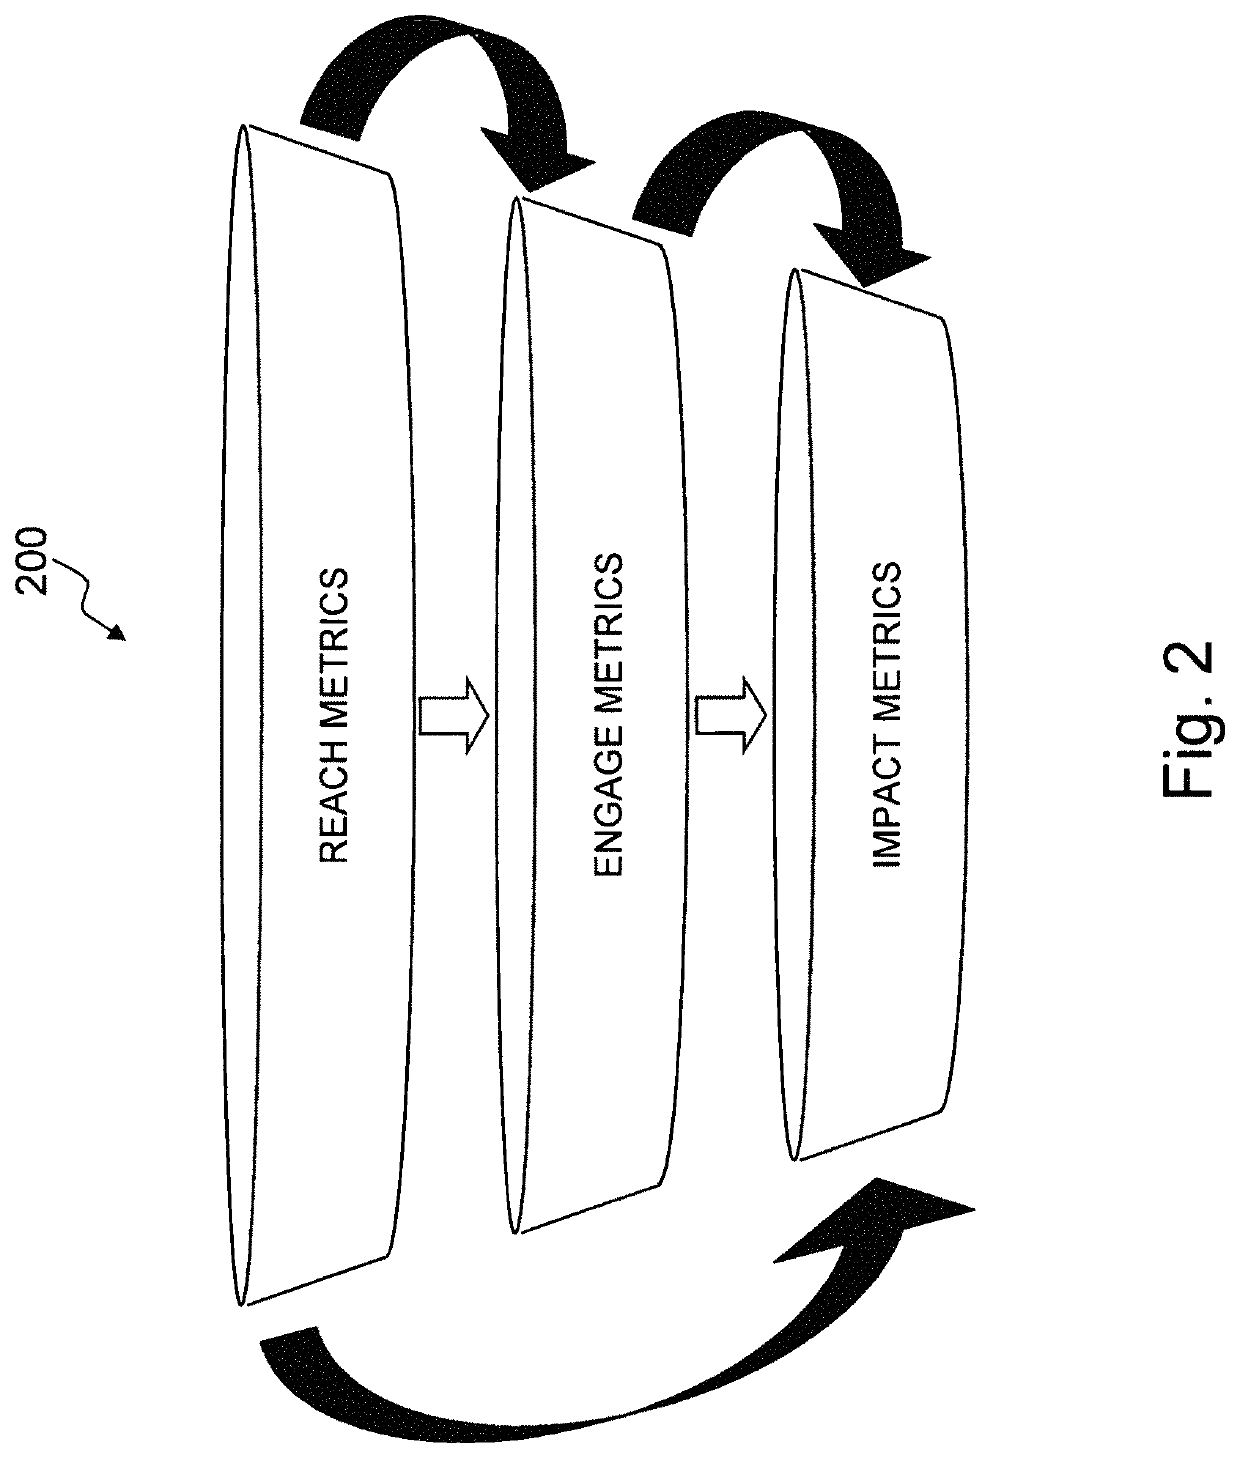 Method and system for collecting shopper response data tied to marketing and merchandising elements